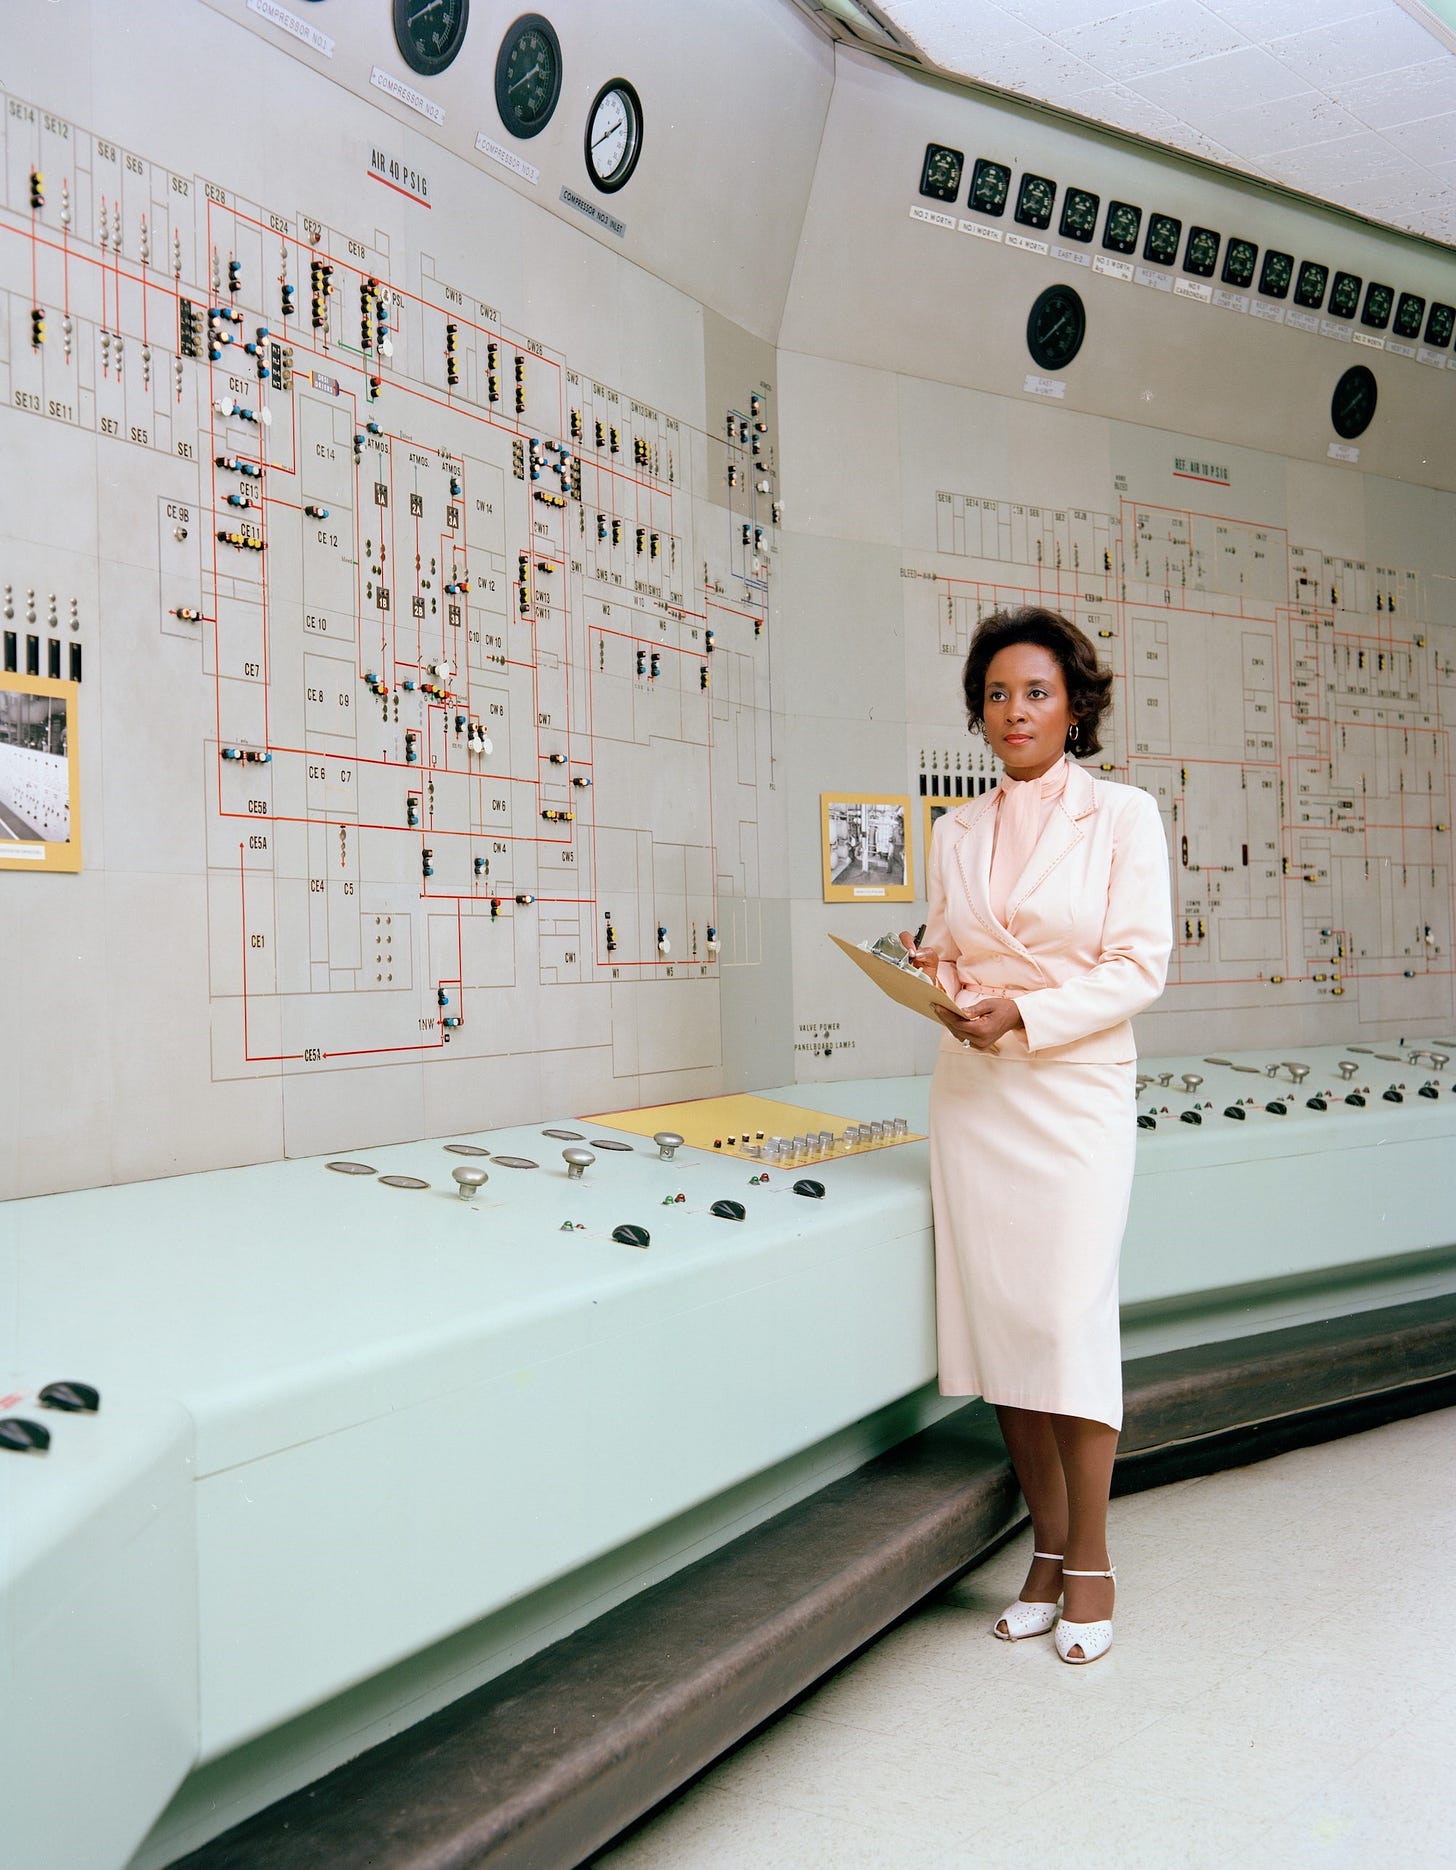 Annie Easley wearing a pink skirt suit and white low heels inside a computer room with clocks lining the top of the room.